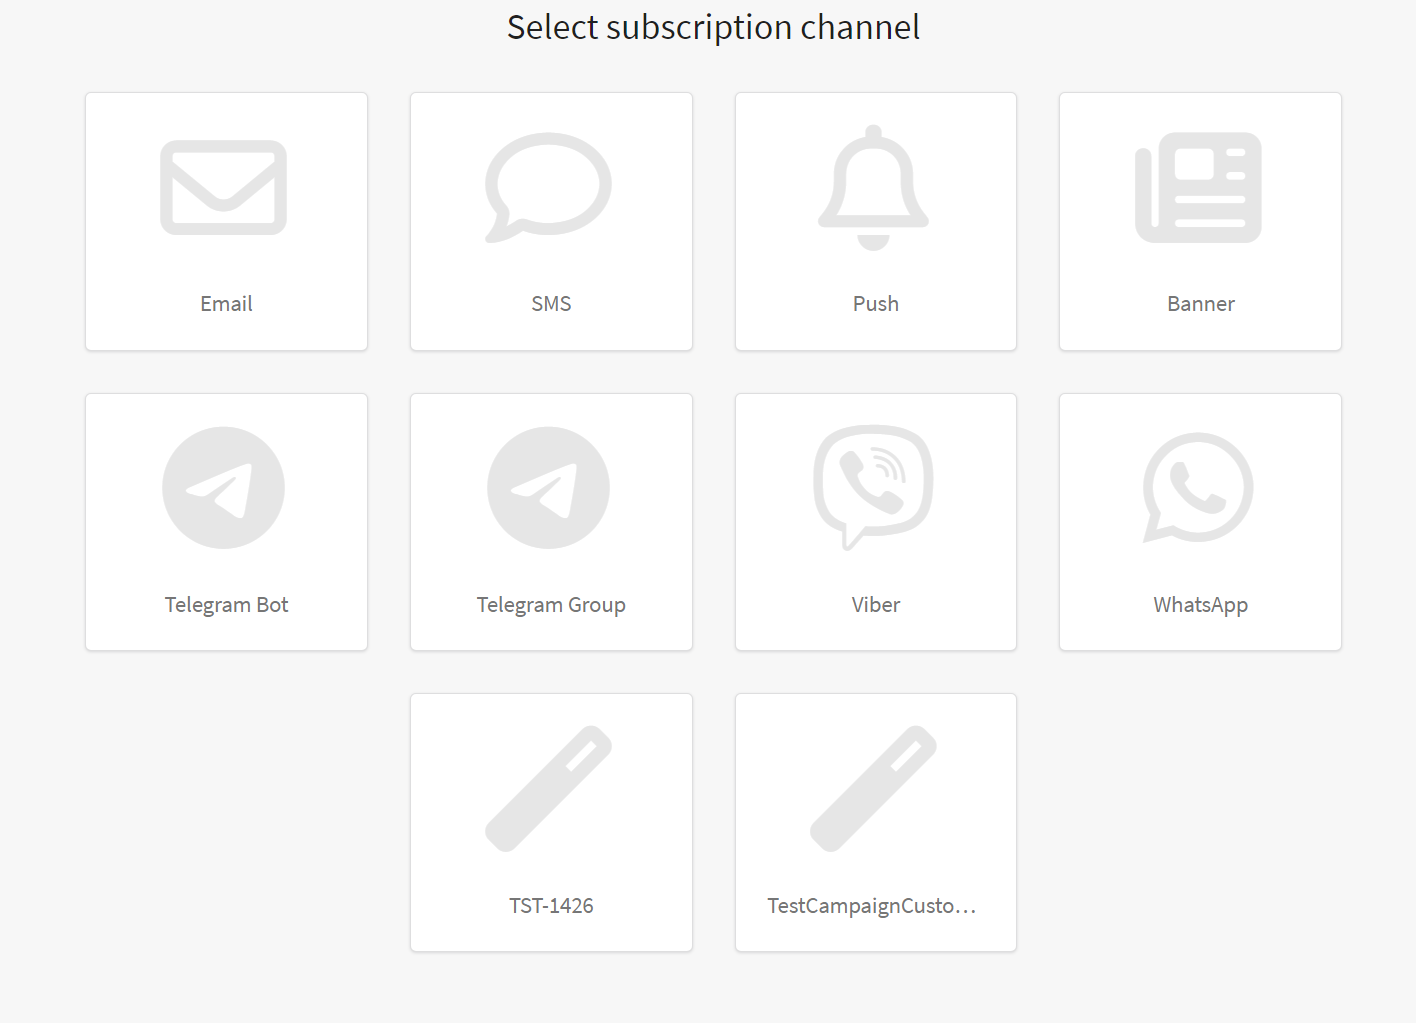 Select channel